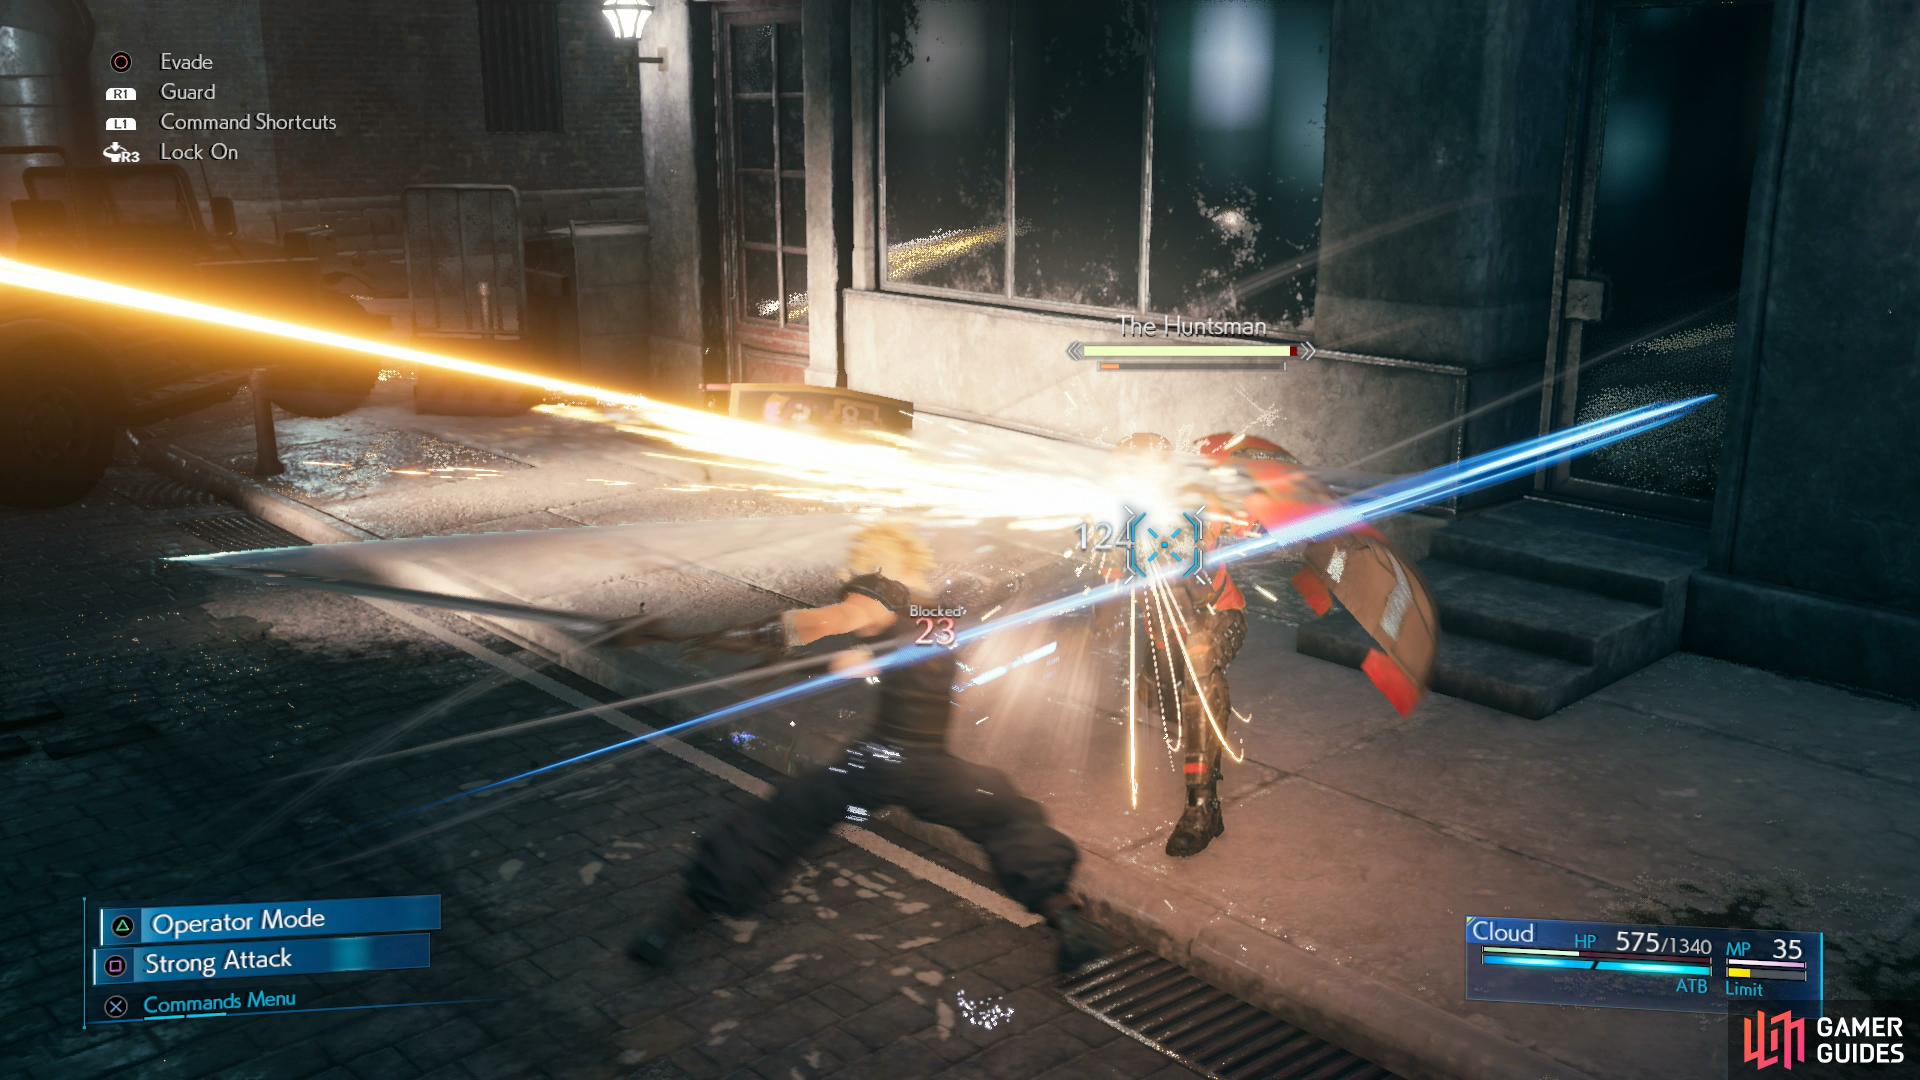 Punisher mode's counterattacks might not leave him vulnerable for long nor do a great deal of damage, but it'll charge your ATB gauge well enough.